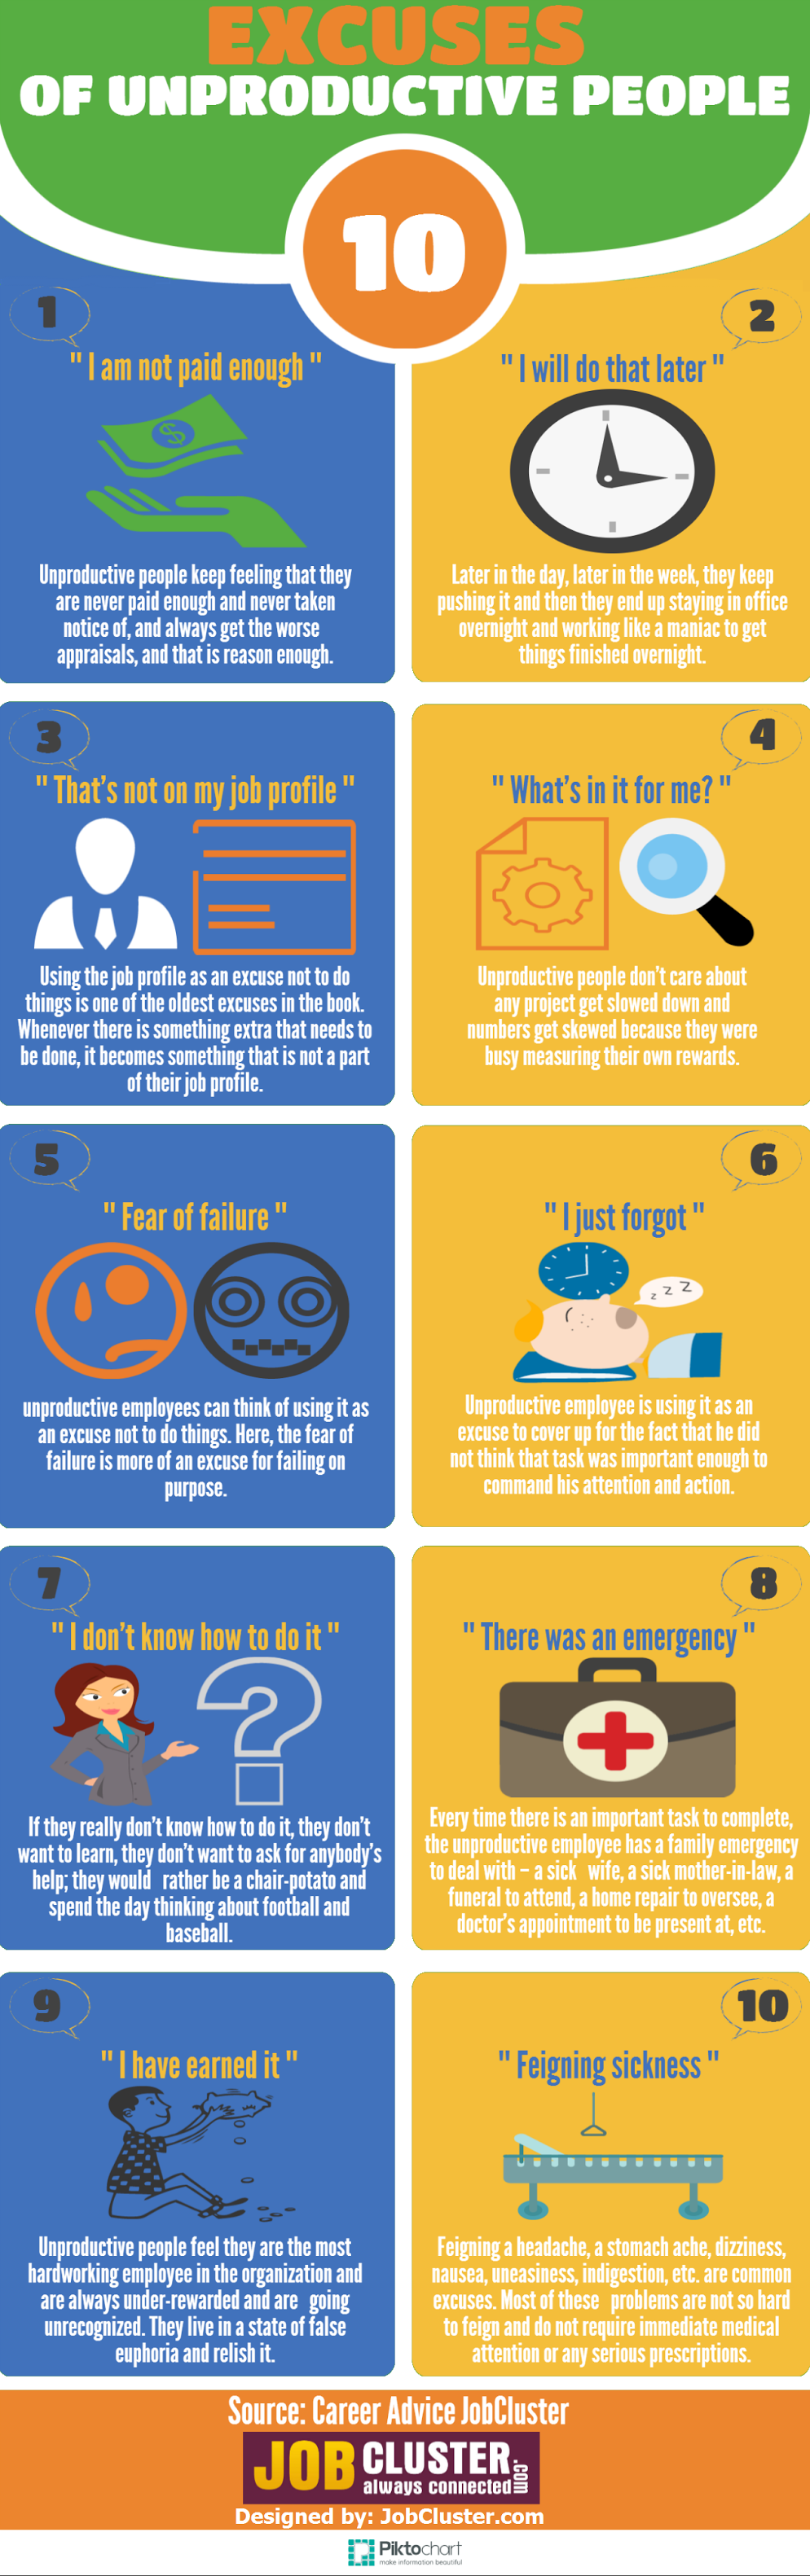 Infographic: 10 Excuses of Unproductive People 